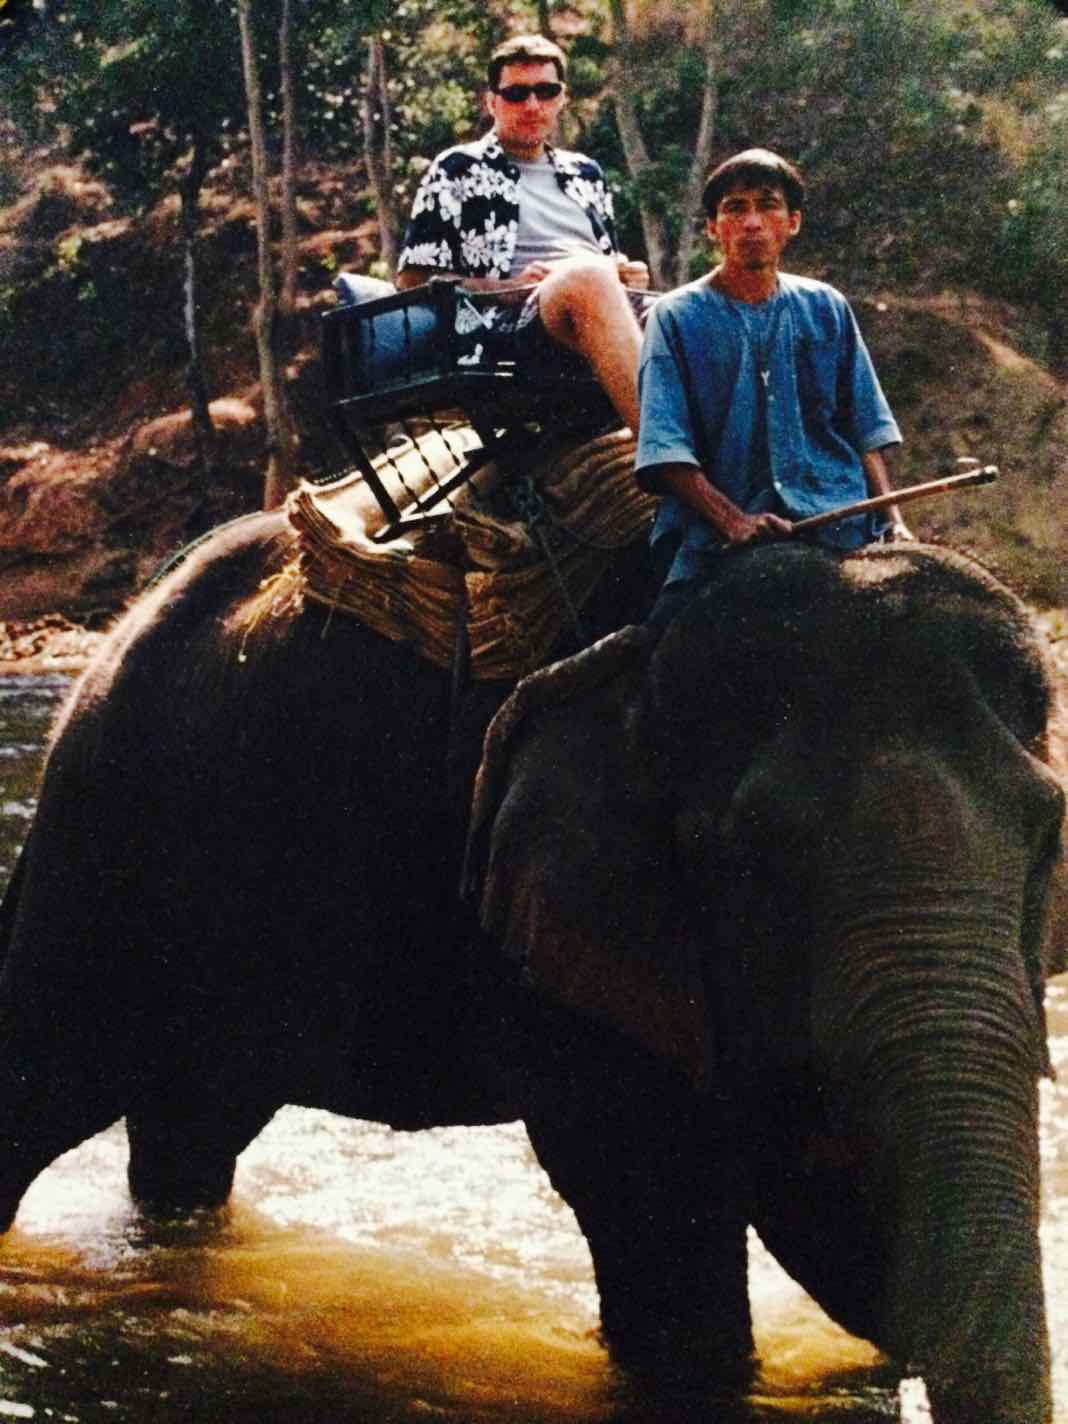 Riding an elephant in Chiang Mai Thailand